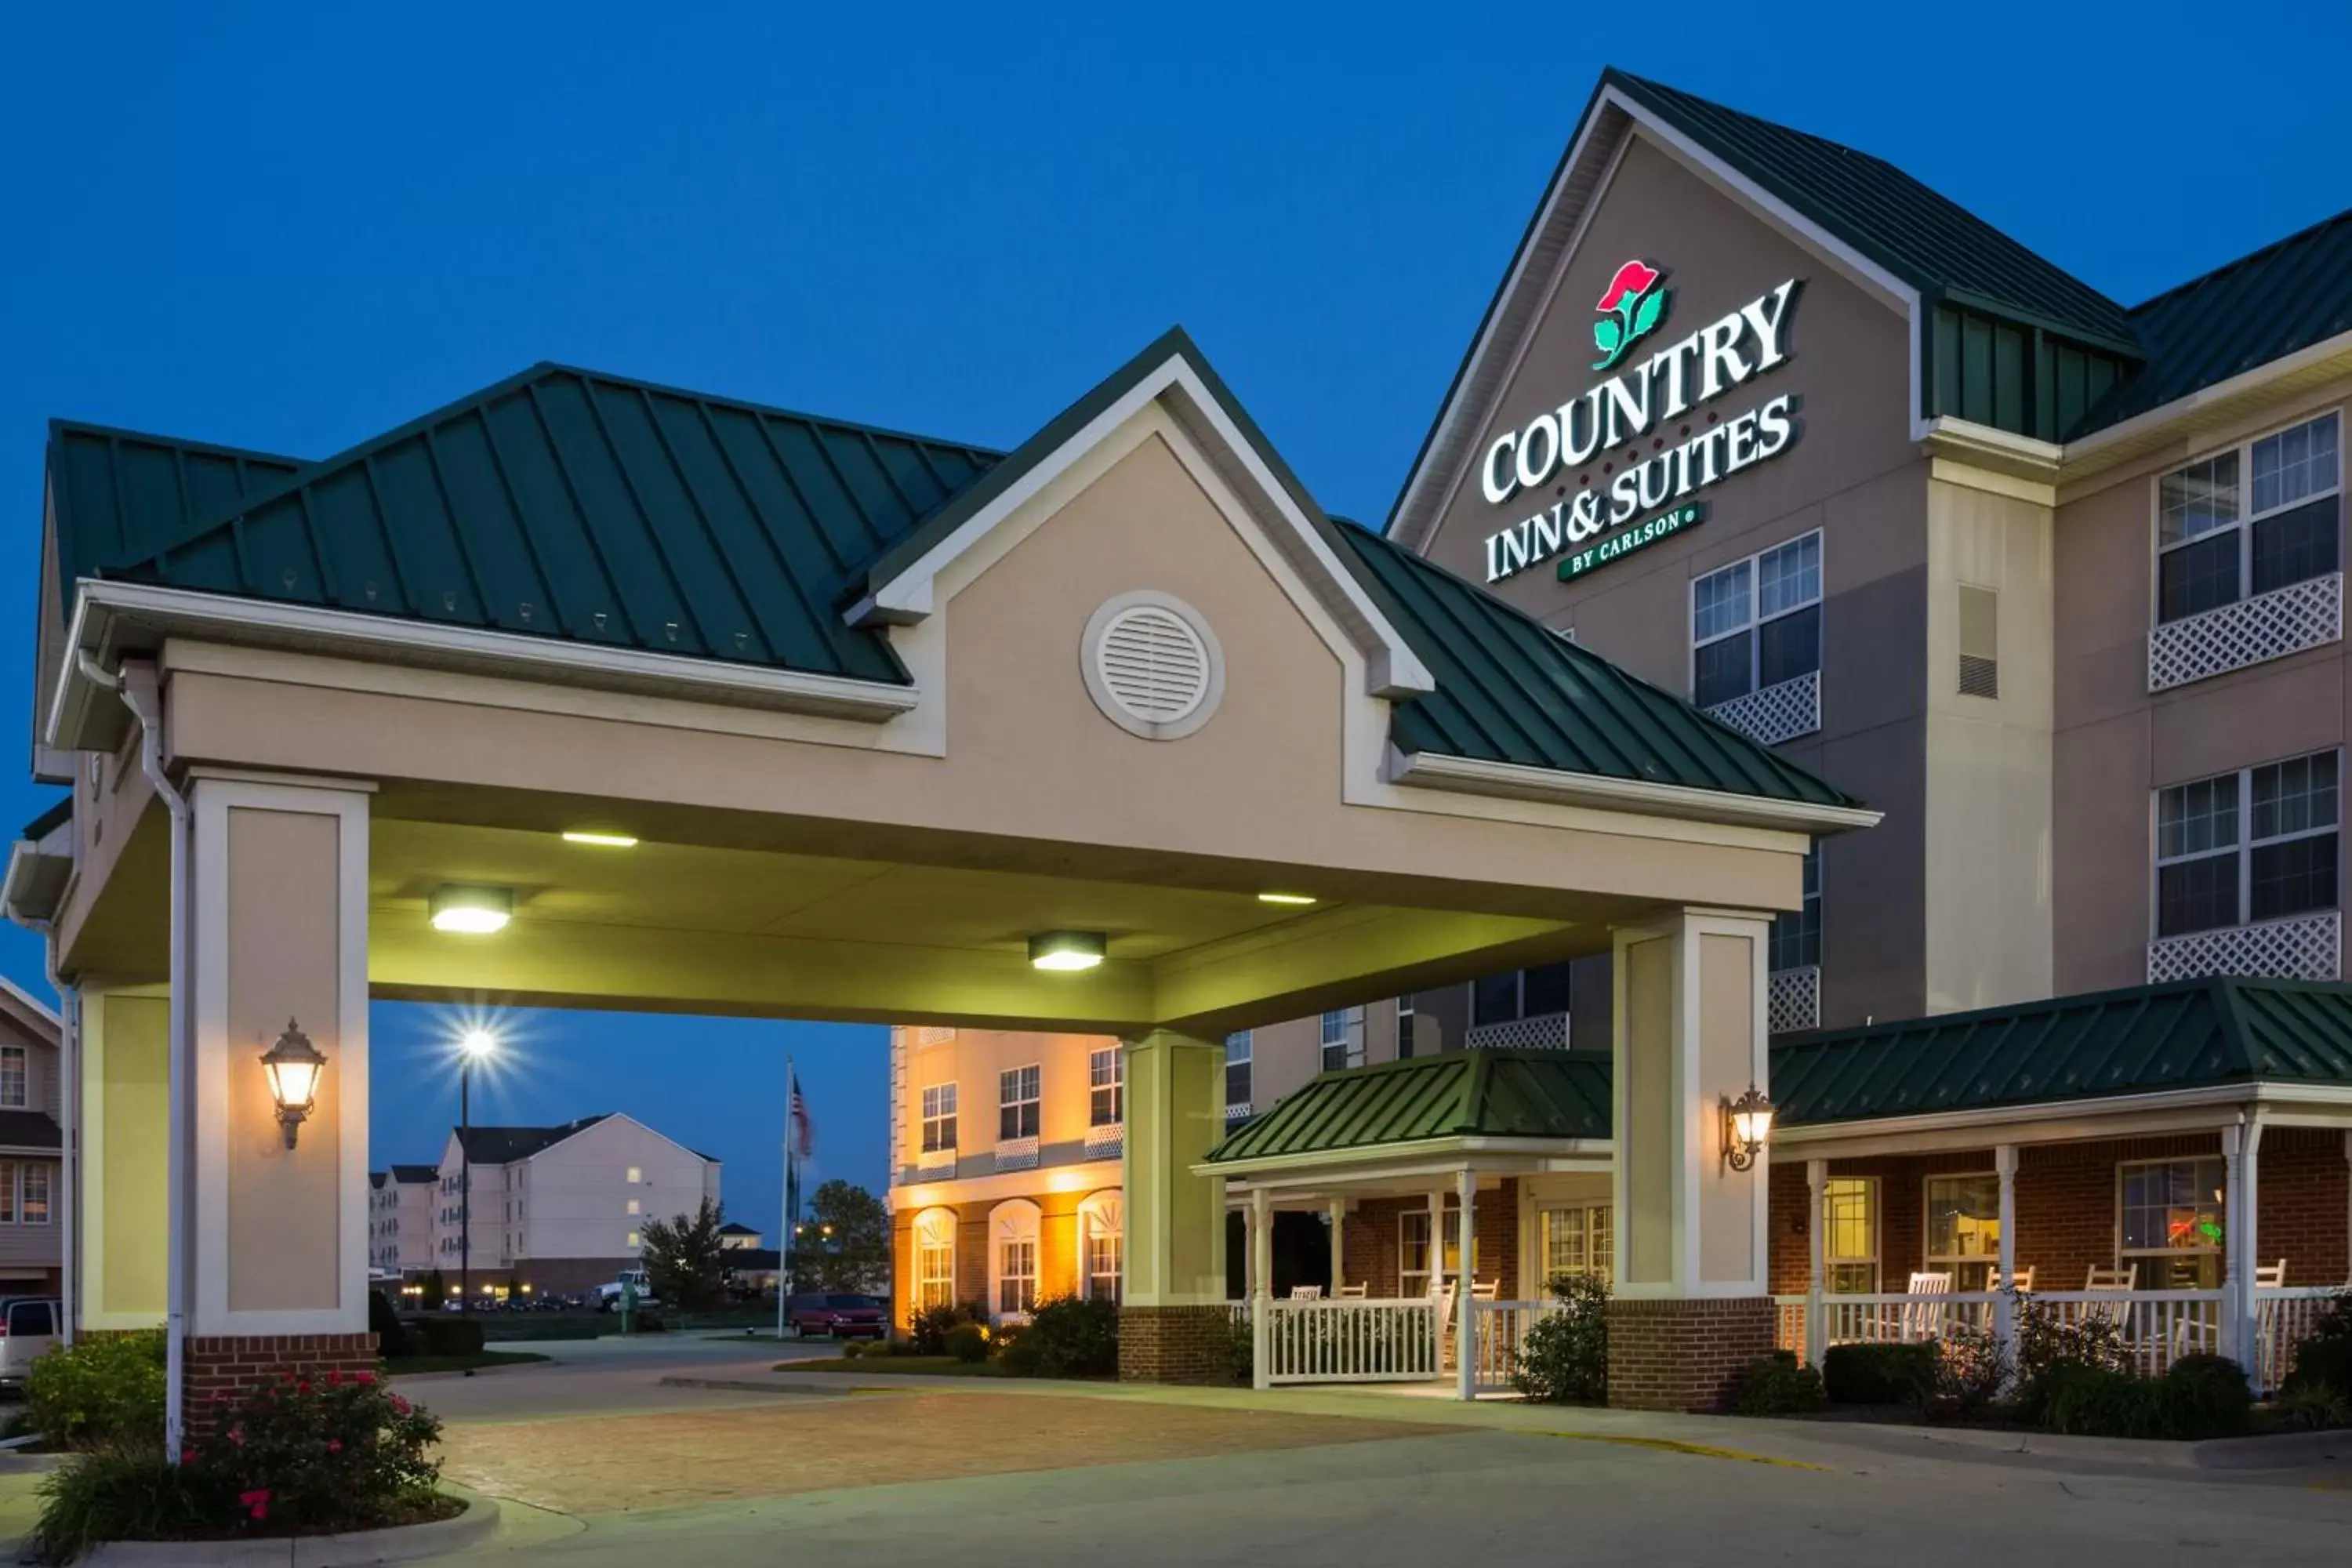 Property Building in Country Inn & Suites by Radisson, Effingham, IL